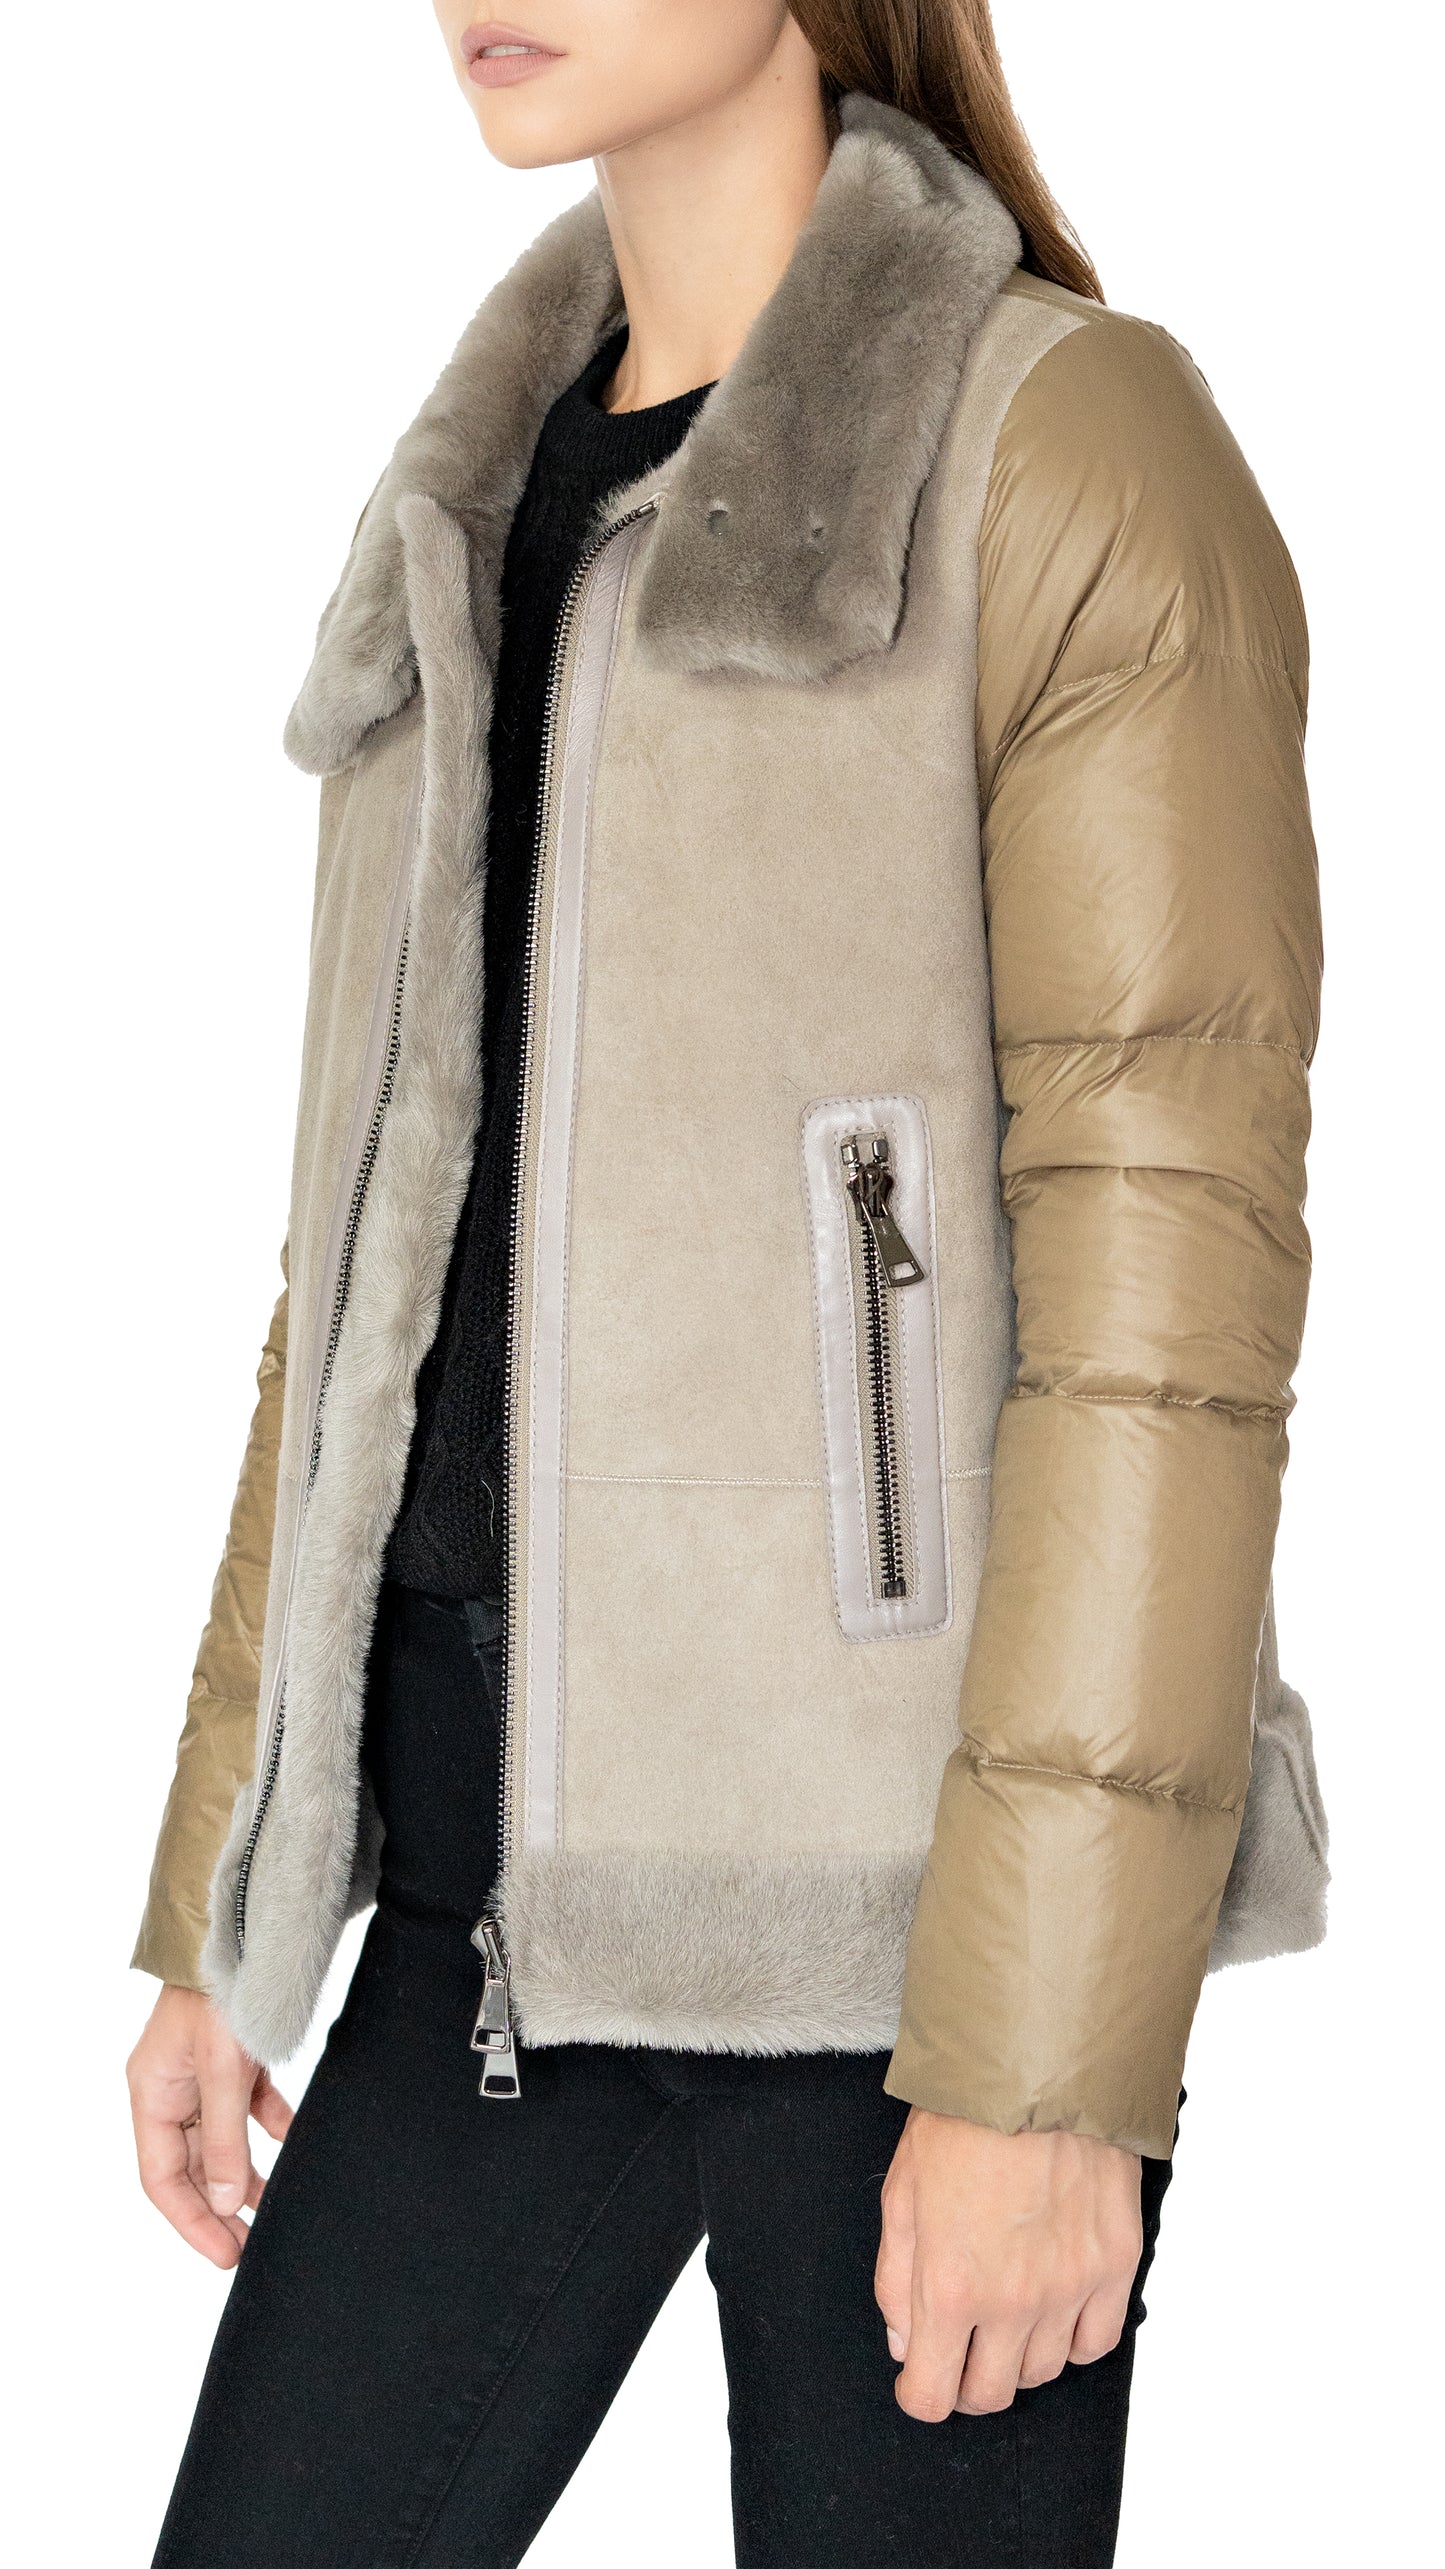 Artico shearling and down jacket in grey and khaki